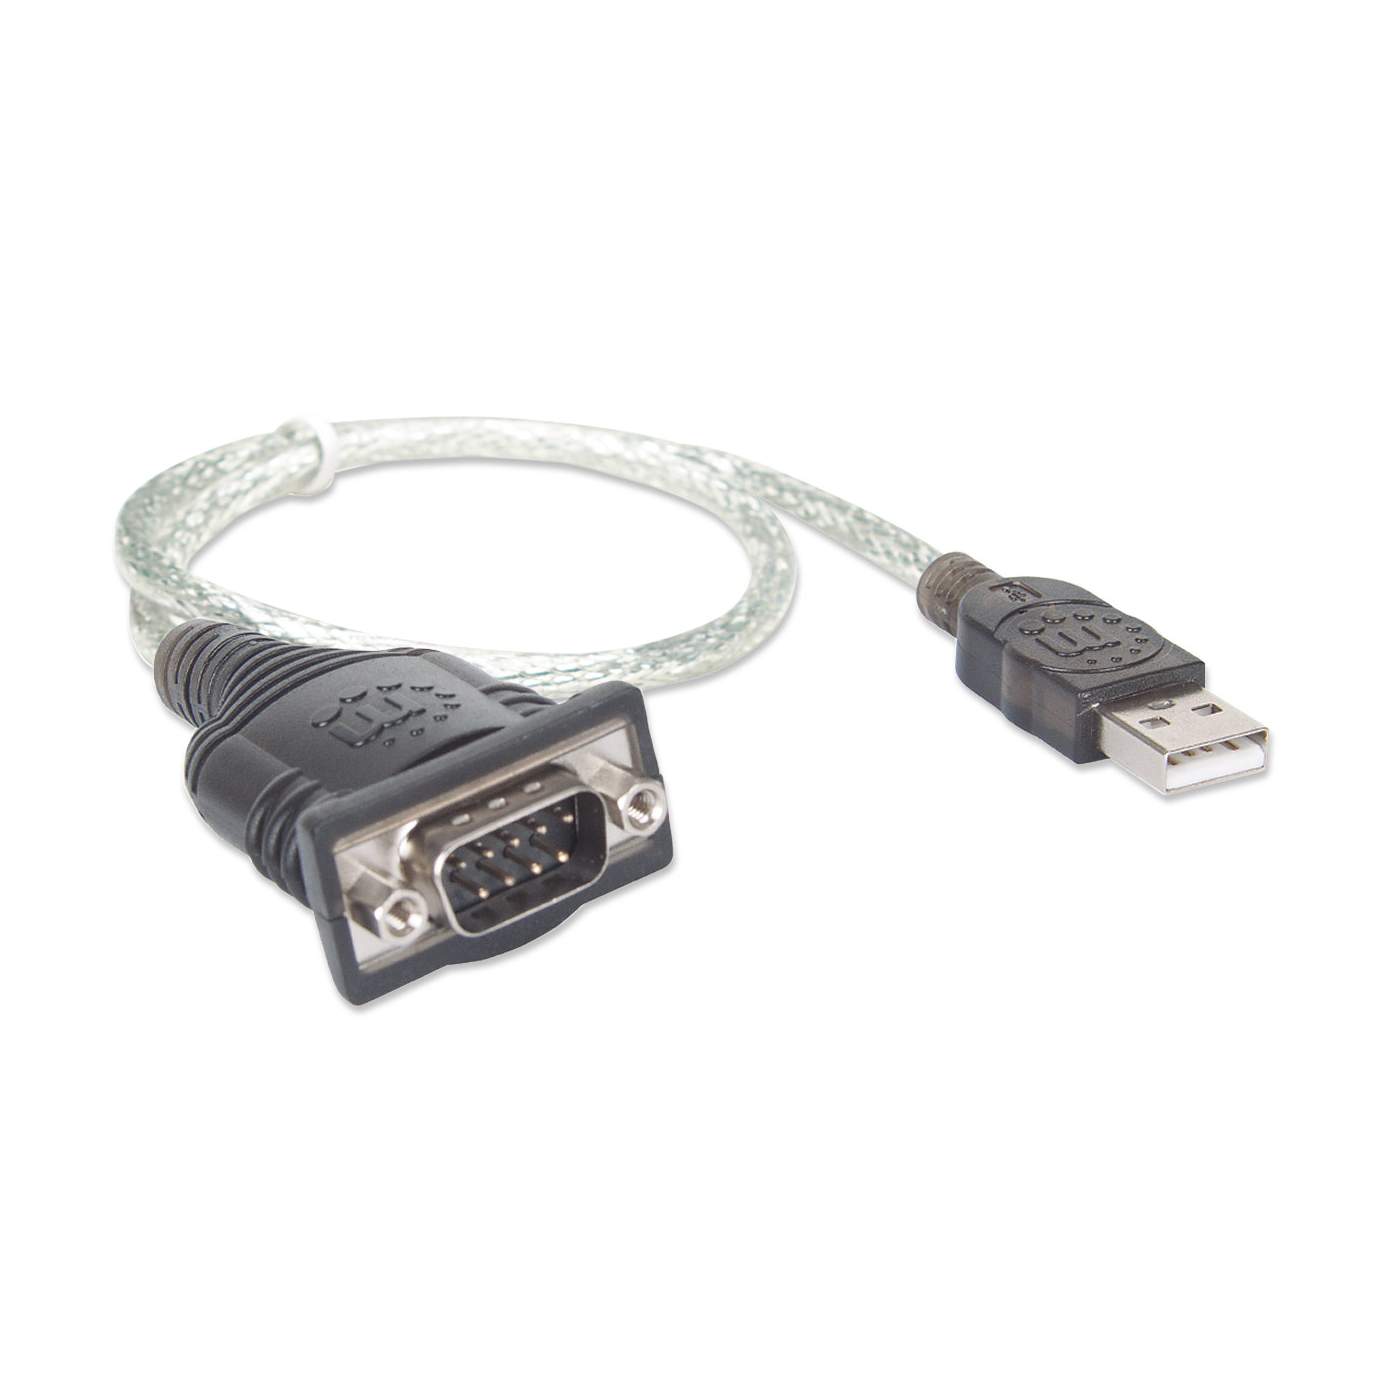 USB to Serial Converter Image 3